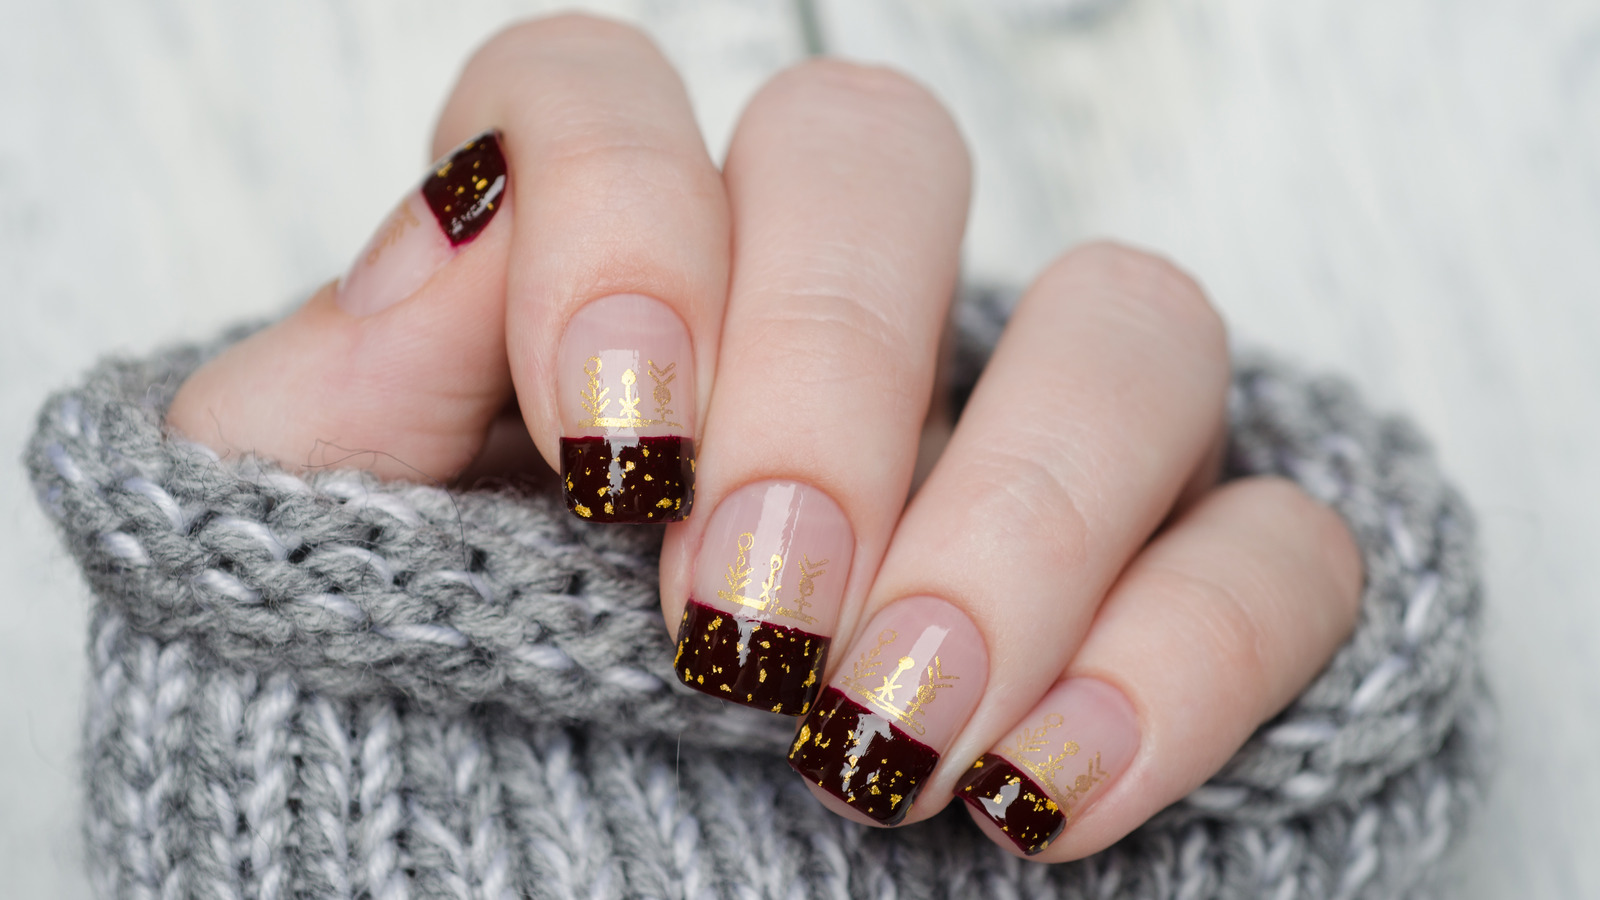 Here's The Manicure That's Perfect For Growing Out Your Nails